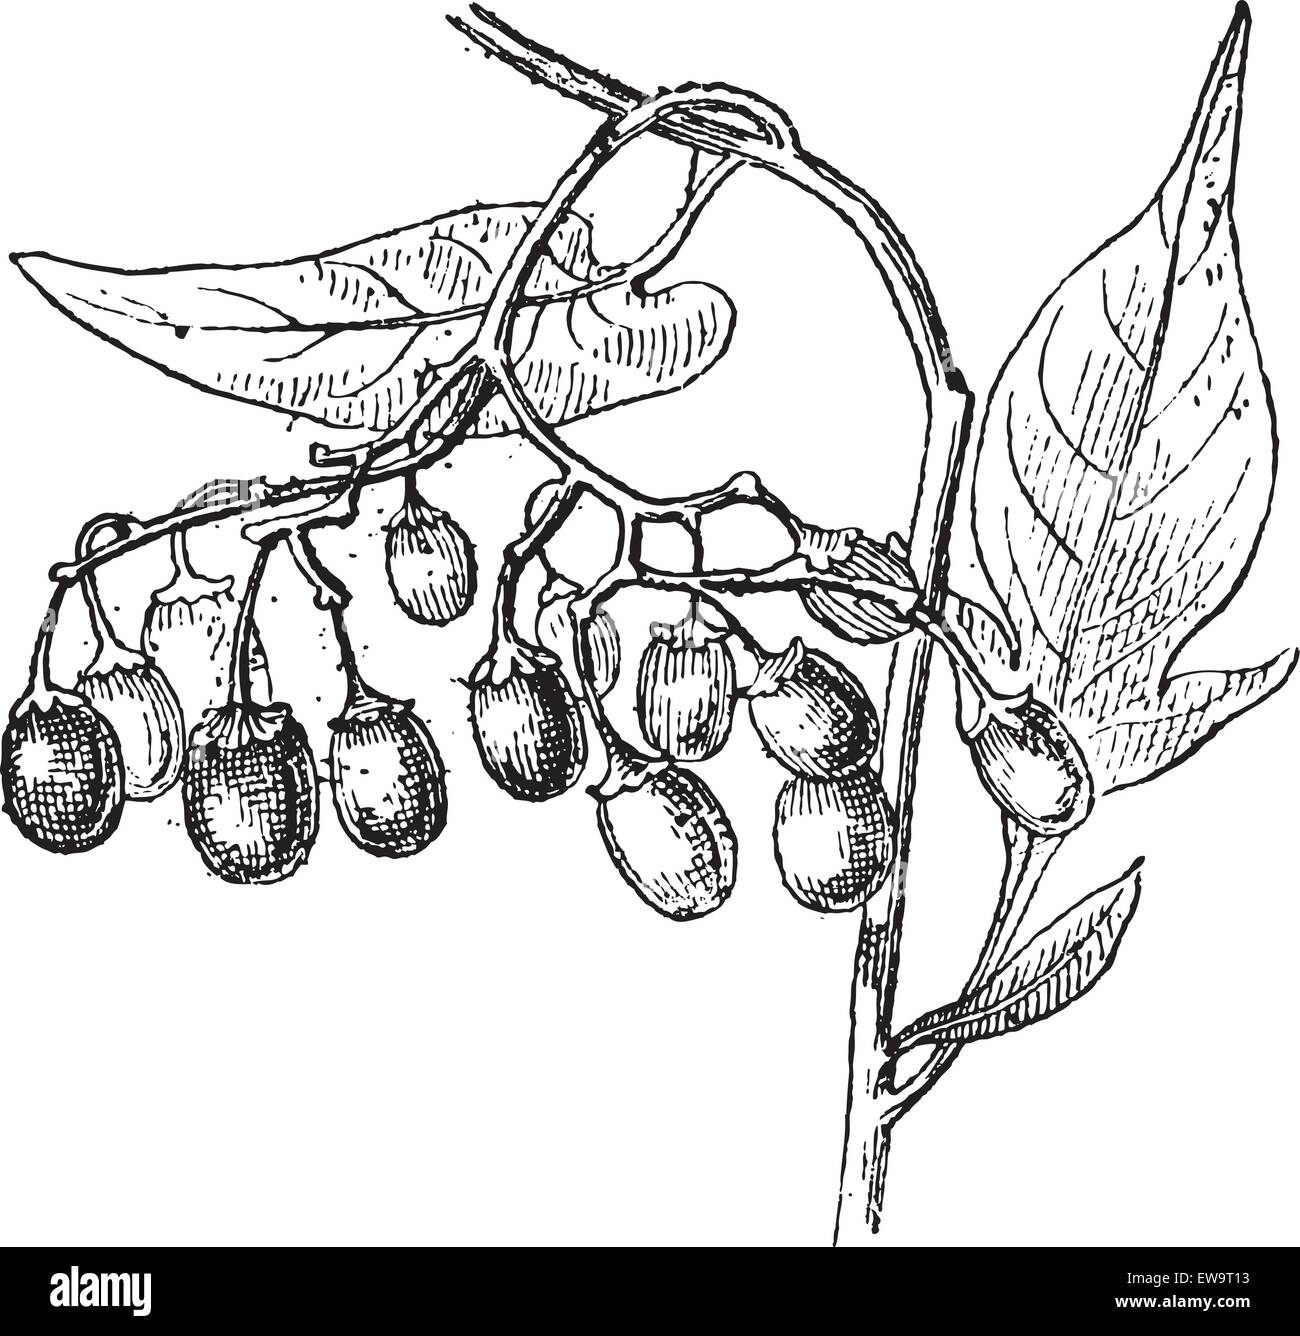 Bittersweet or Solanum dulcamara, showing fruits, vintage engraved illustration. Dictionary of Words and Things - Larive and Fleury - 1895 Stock Vector